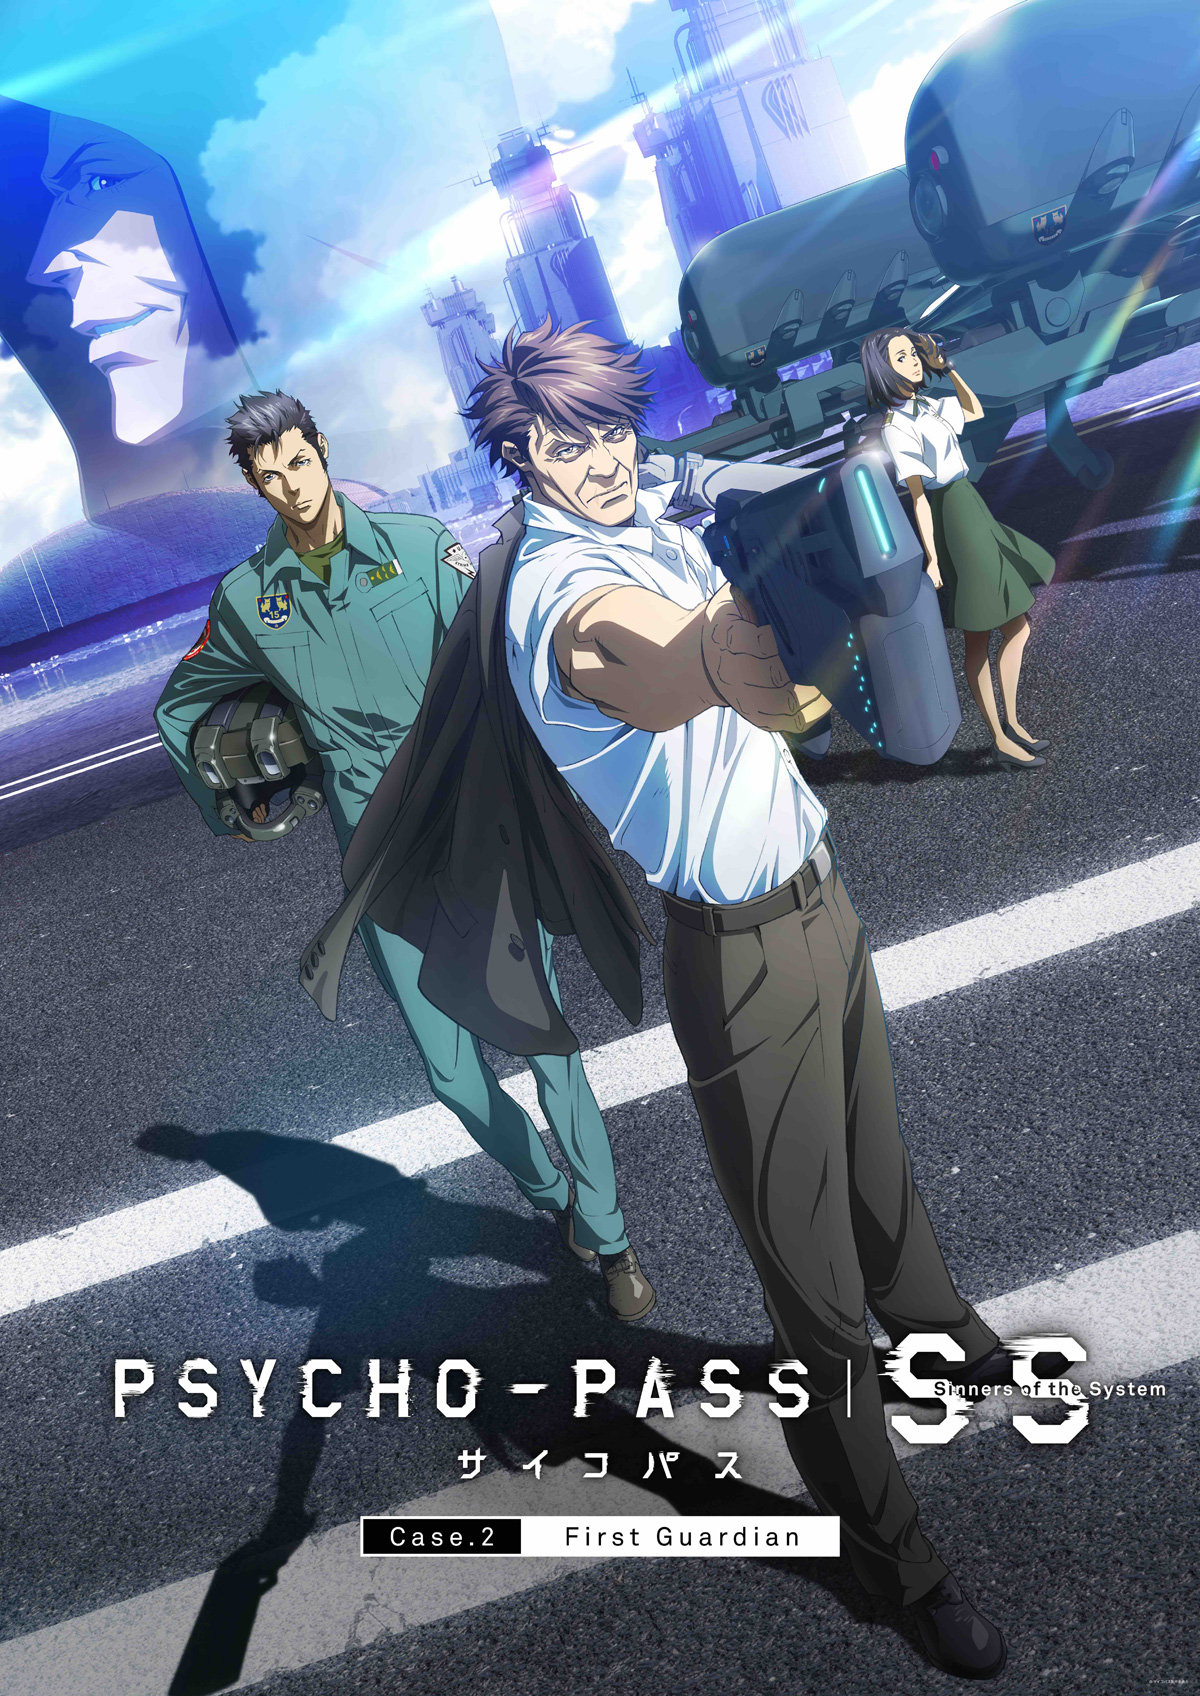 PSYCHO-PASS サイコパス Sinners of the System Case.2 First Guardianの画像